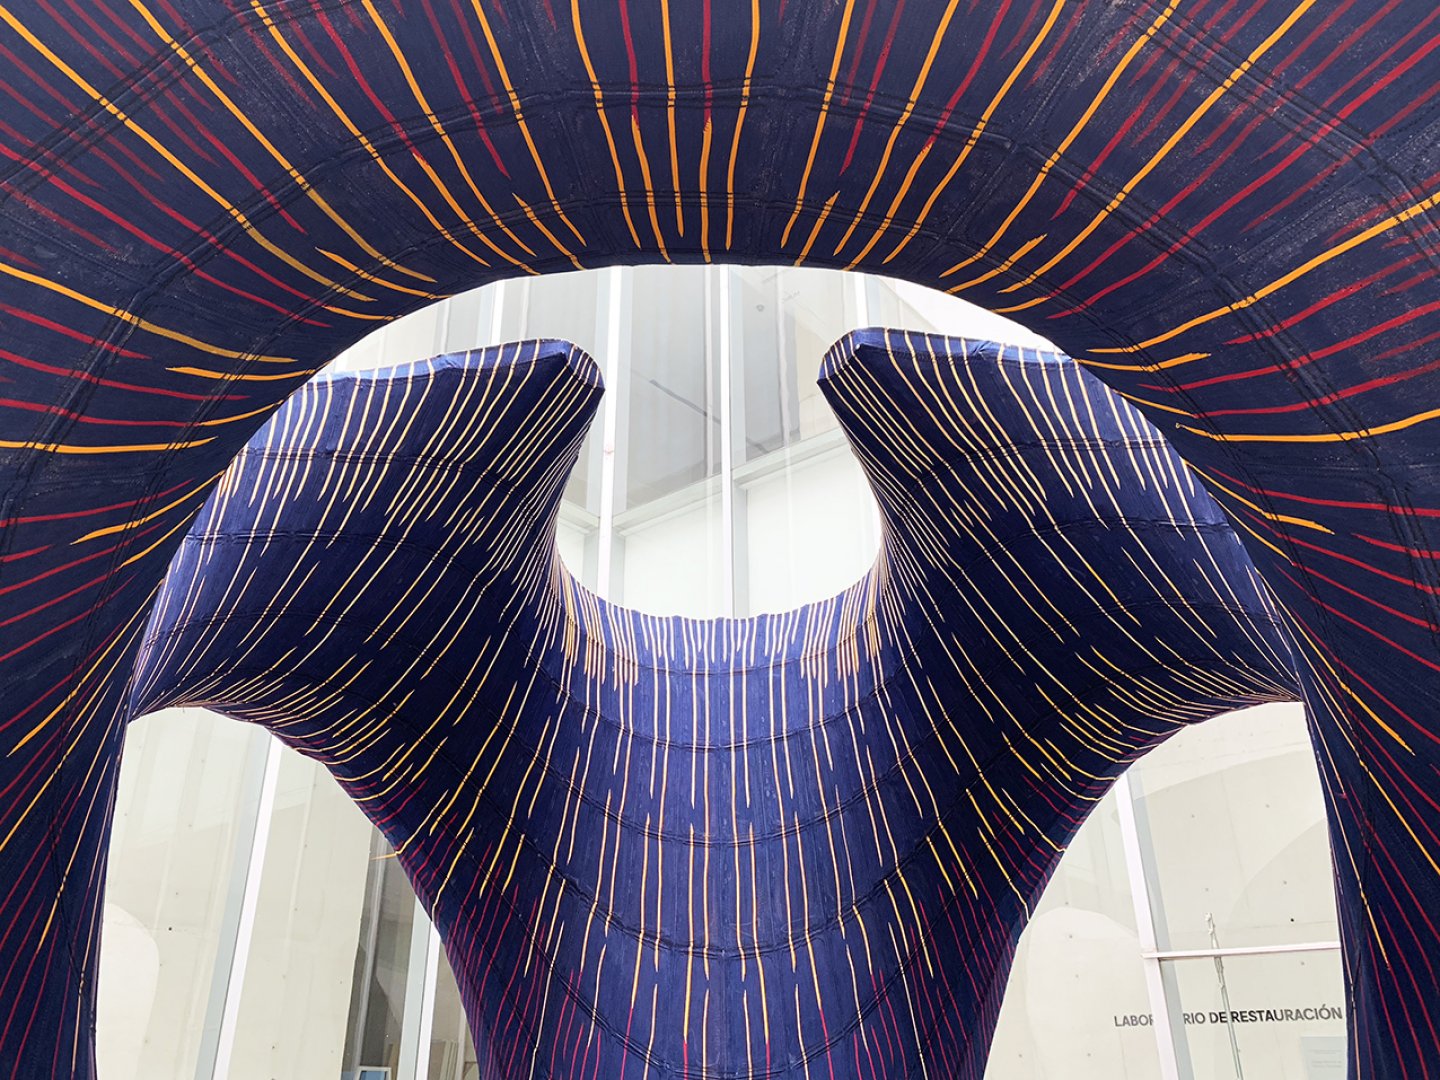 The colorful, textile-based underside of KnitCandela, the new experimental pavilion from Zaha Hadid Achitects and ETH Zurich.